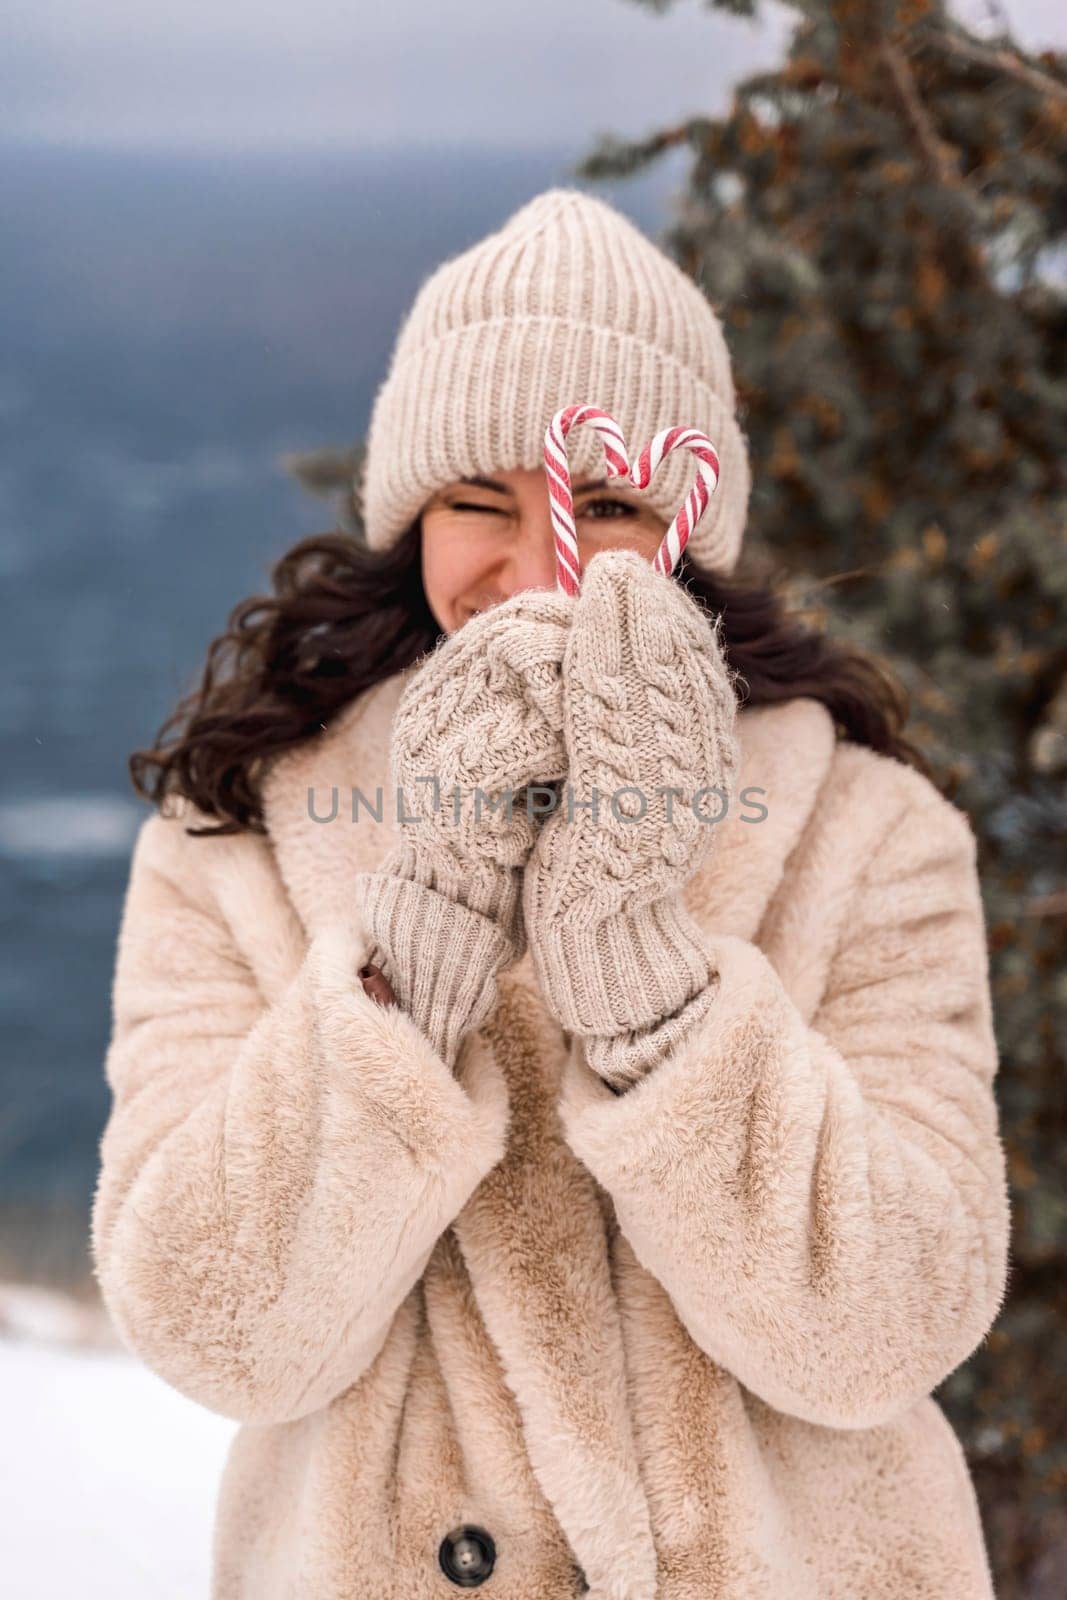 Woman christmas candy. Smiling woman in knitted hat, mittens and beige coat holding lollipops christmas candy canes in her hands in shape of heart against the backdrop of the sea. by Matiunina